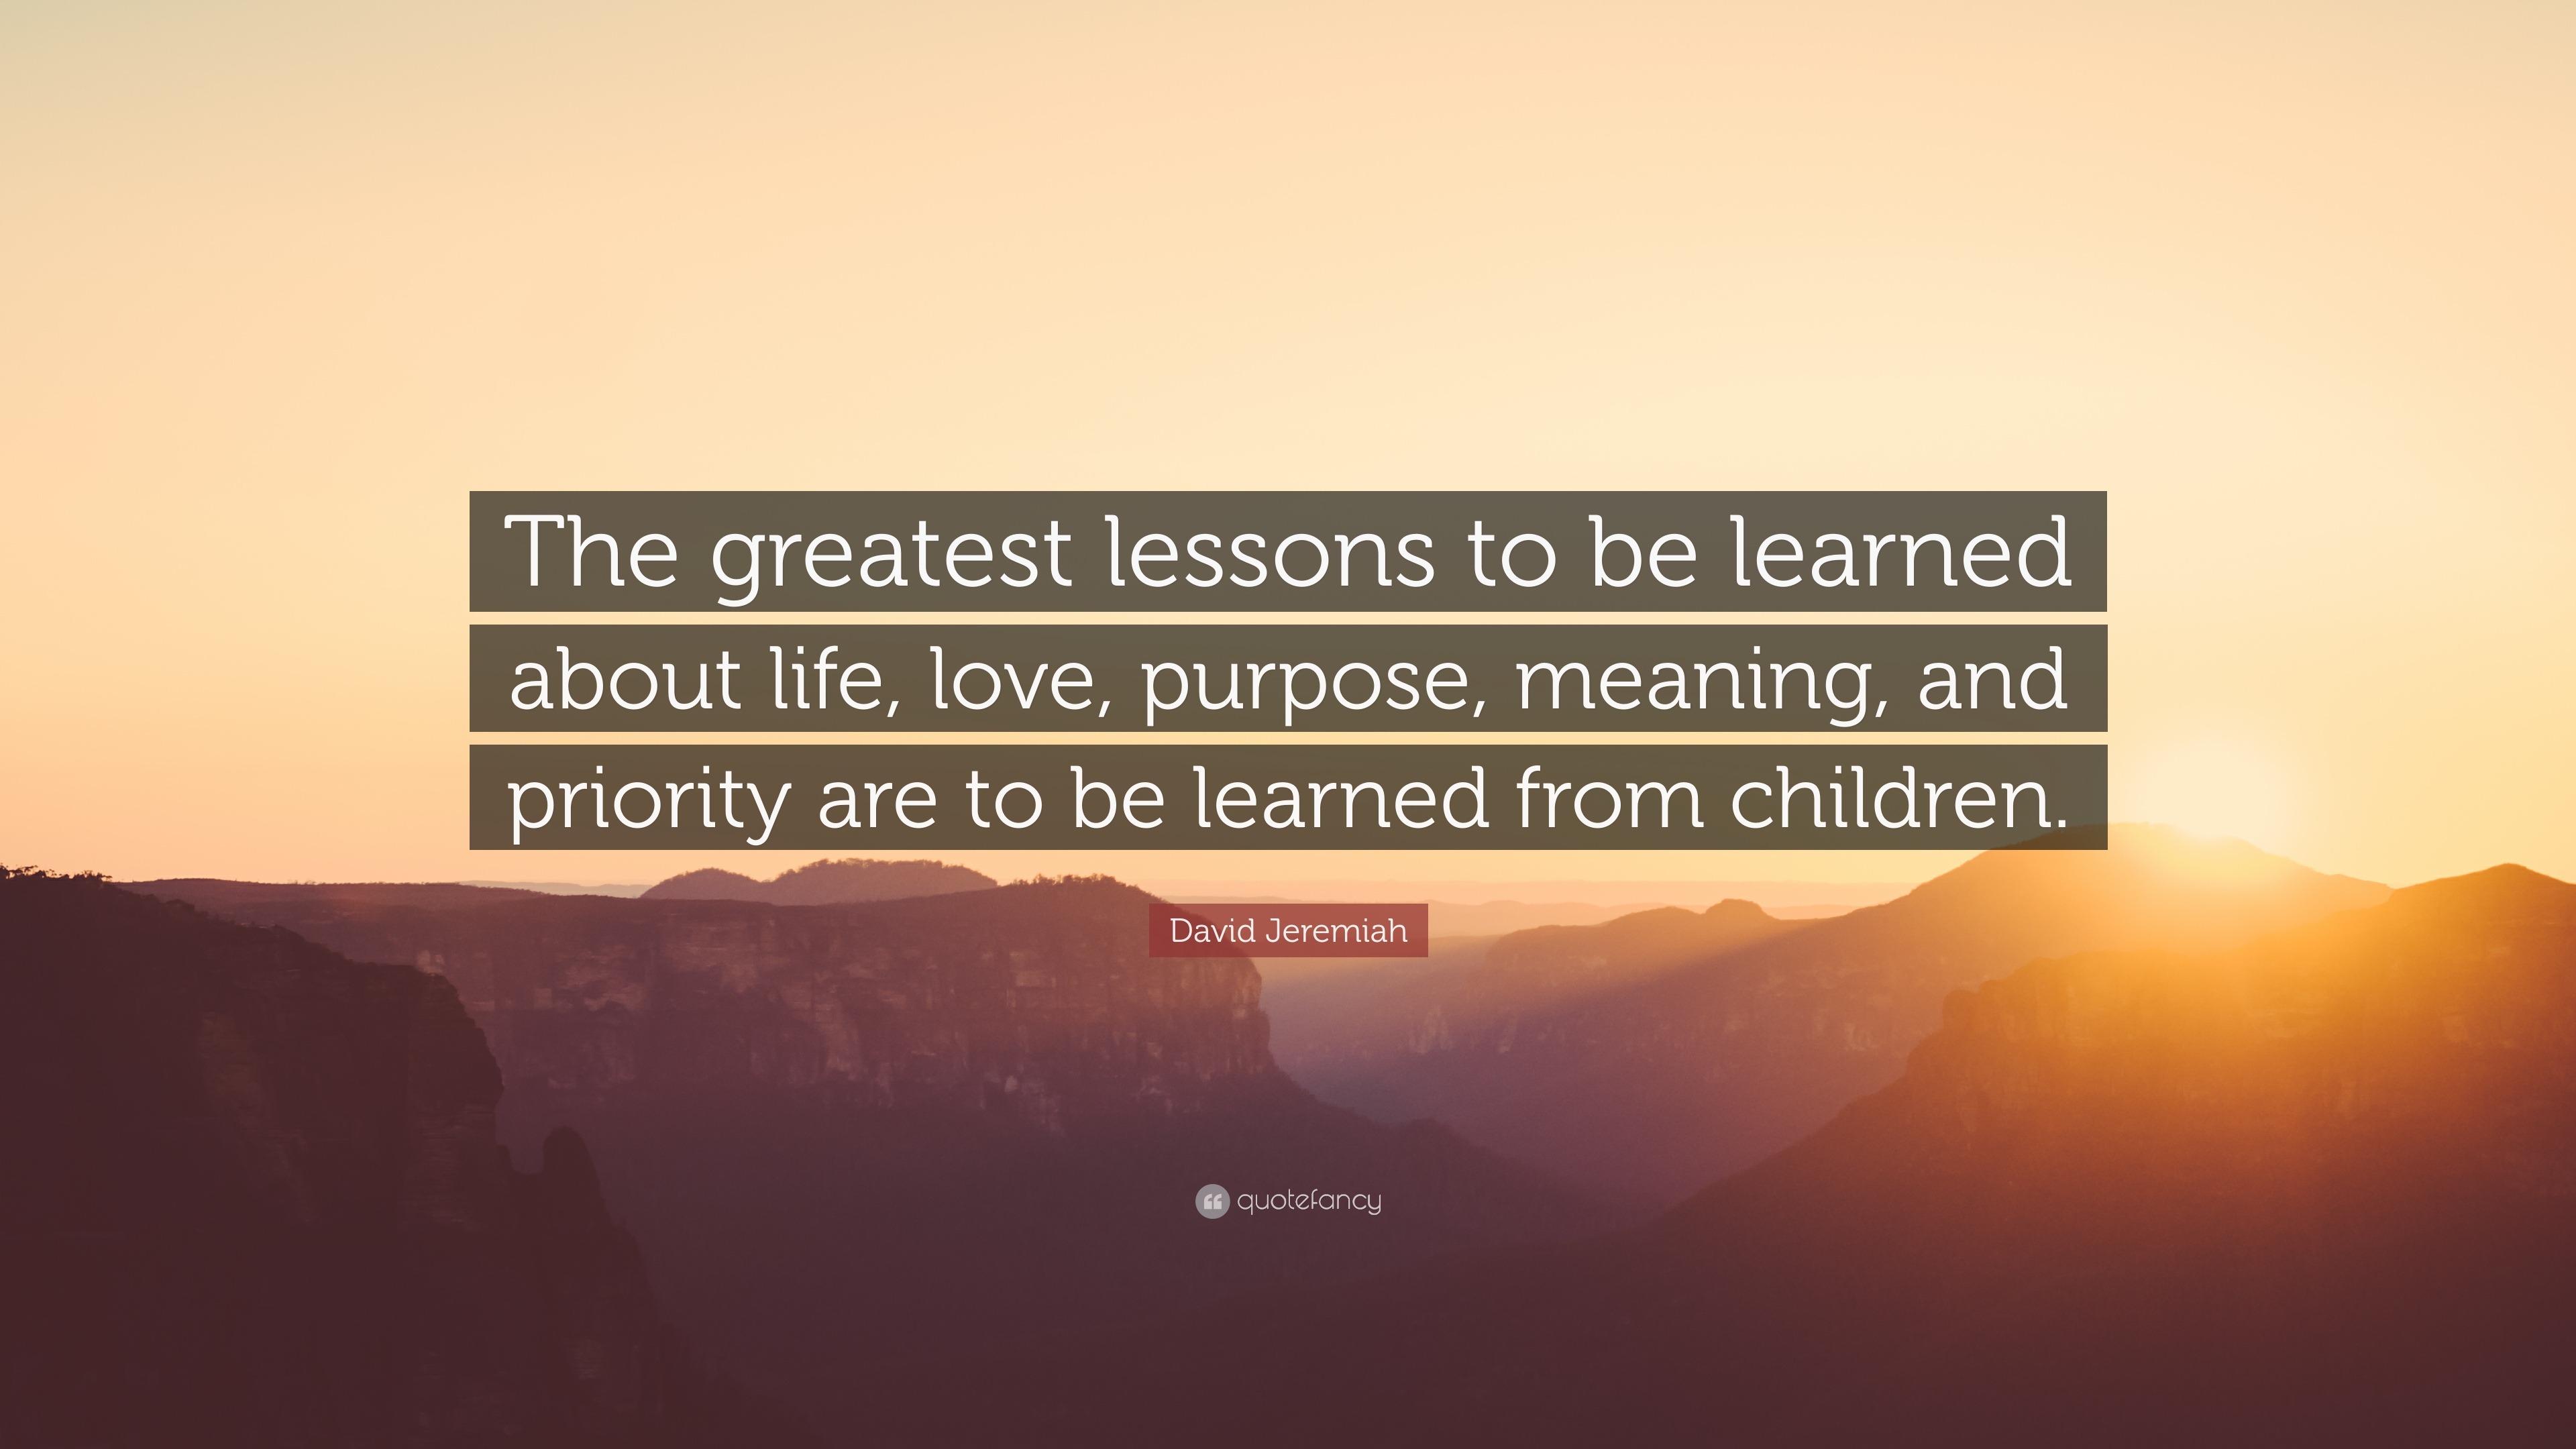 David Jeremiah Quote “The greatest lessons to be learned about life love